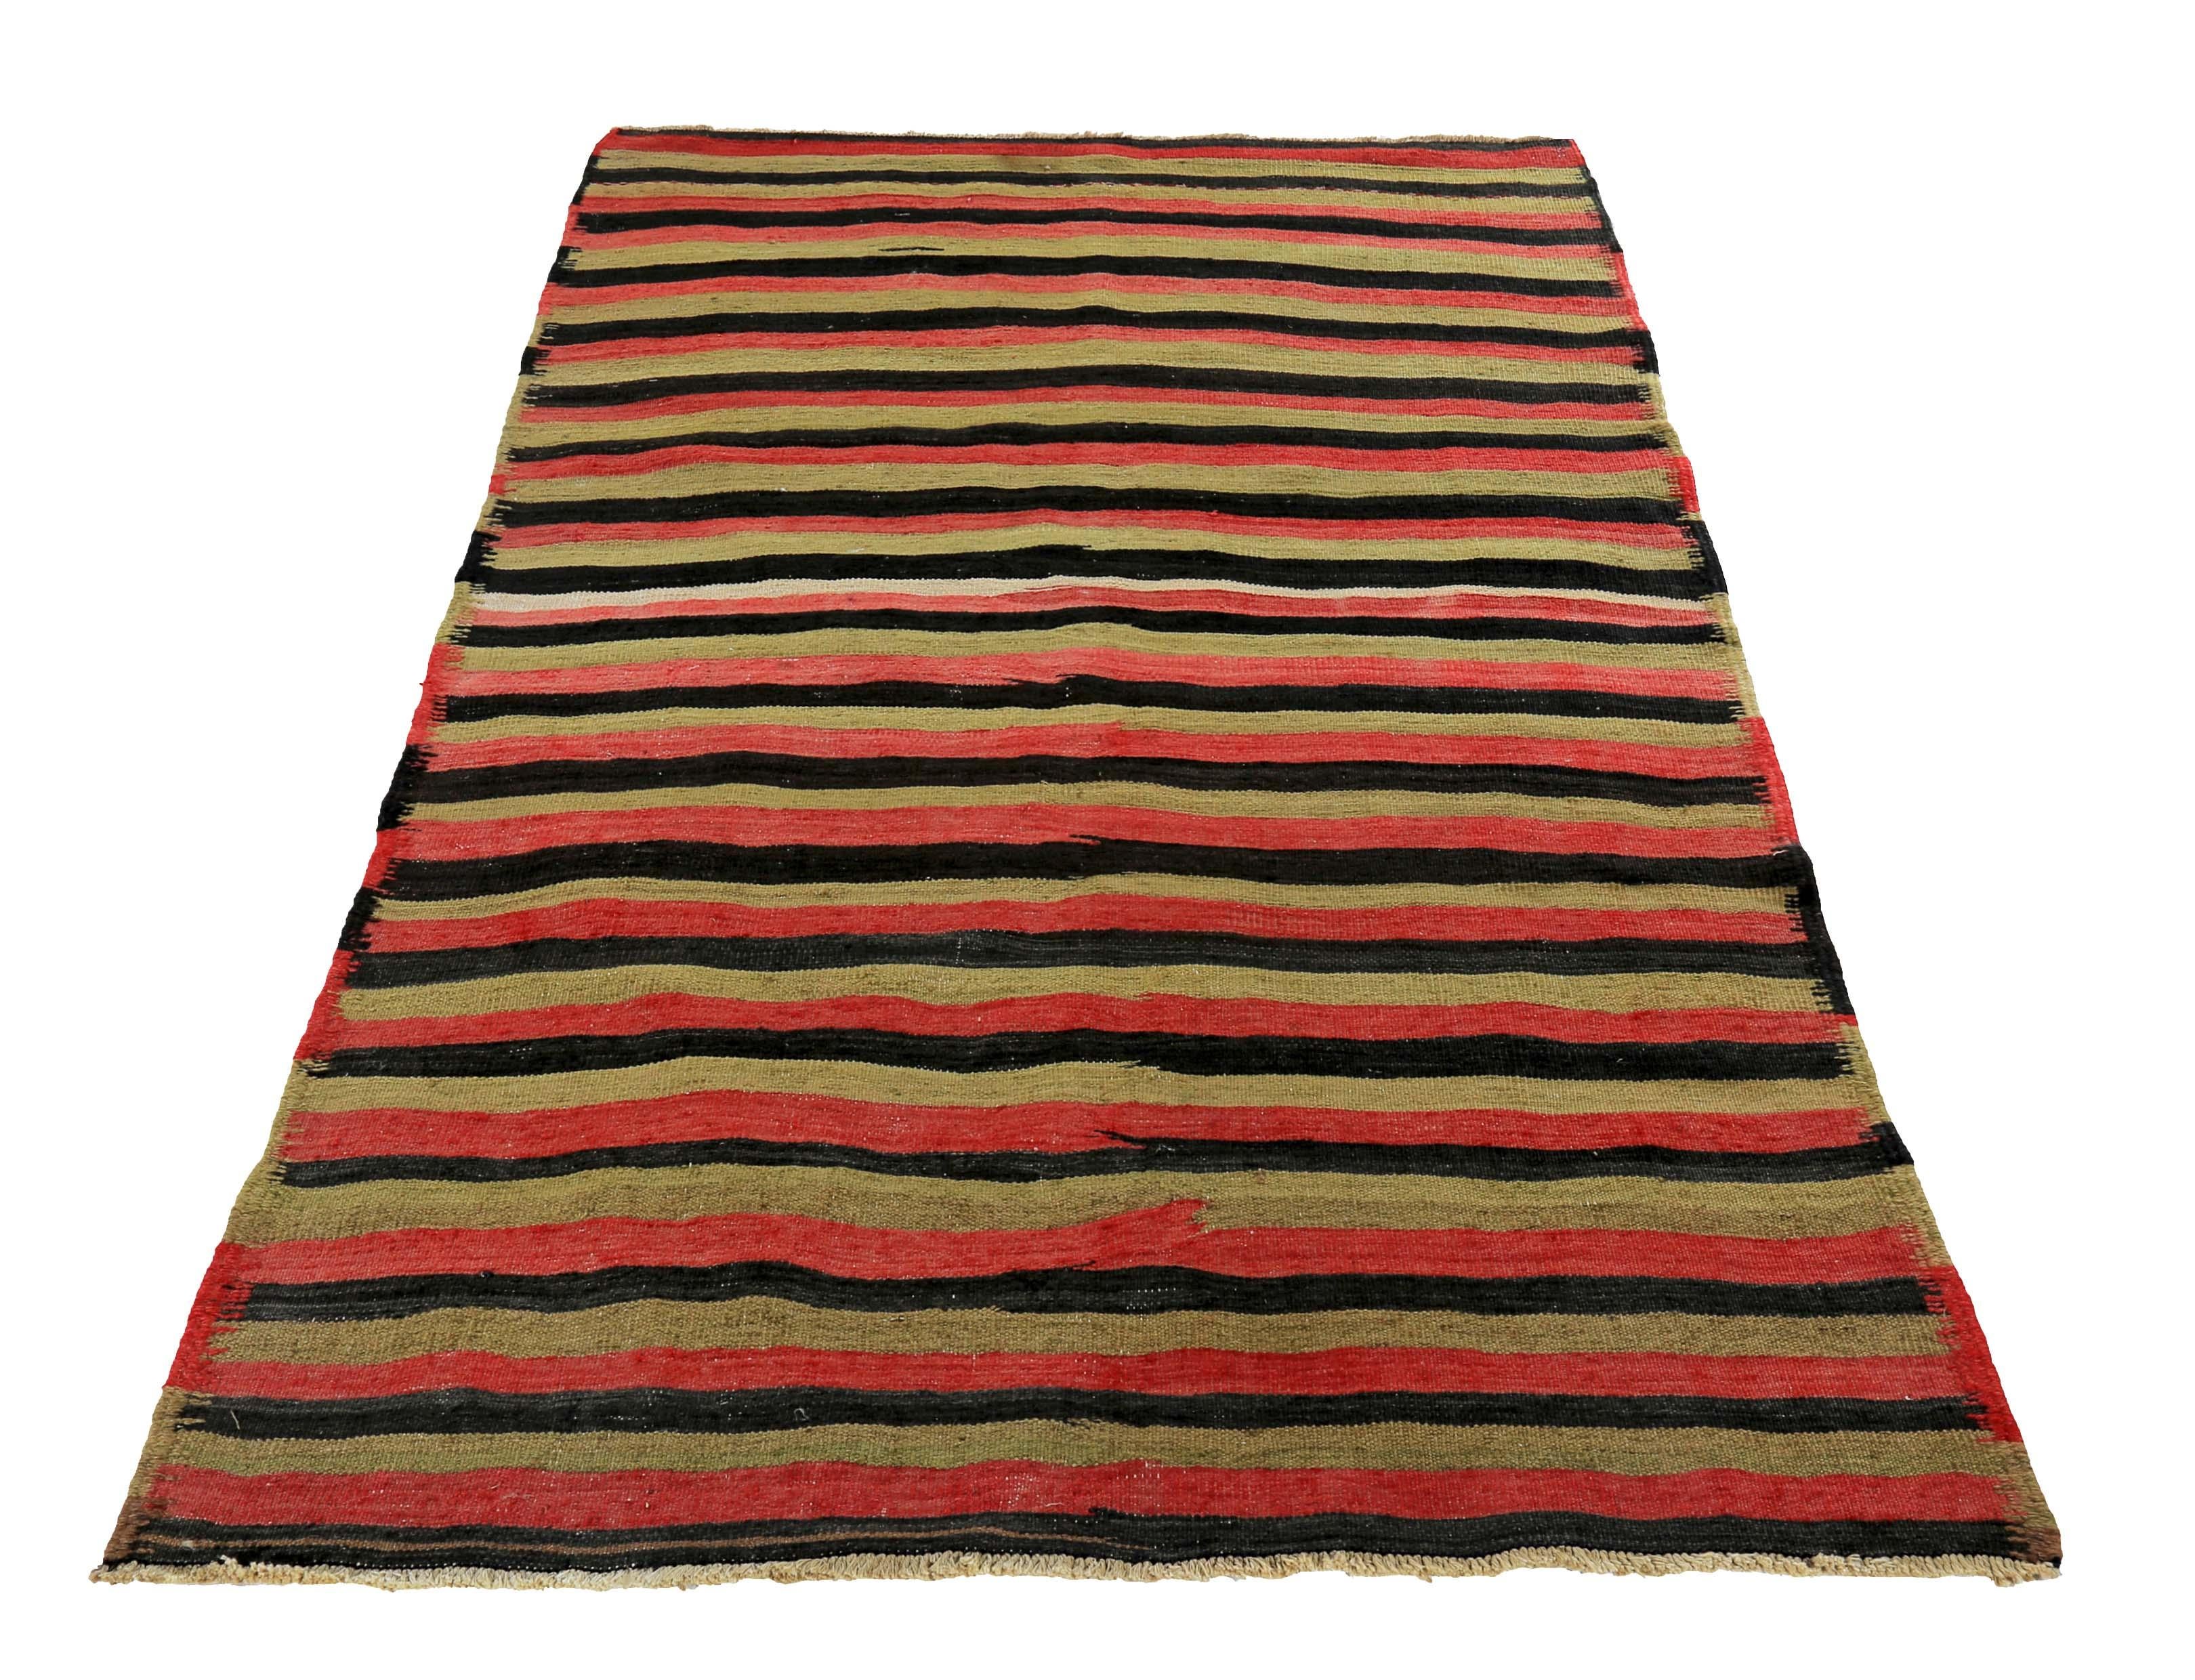 Turkish rug handwoven from the finest sheep’s wool and colored with all-natural vegetable dyes that are safe for humans and pets. It’s a traditional Kilim flat-weave design featuring black and red tribal stripes over a lovely gold field. It’s a